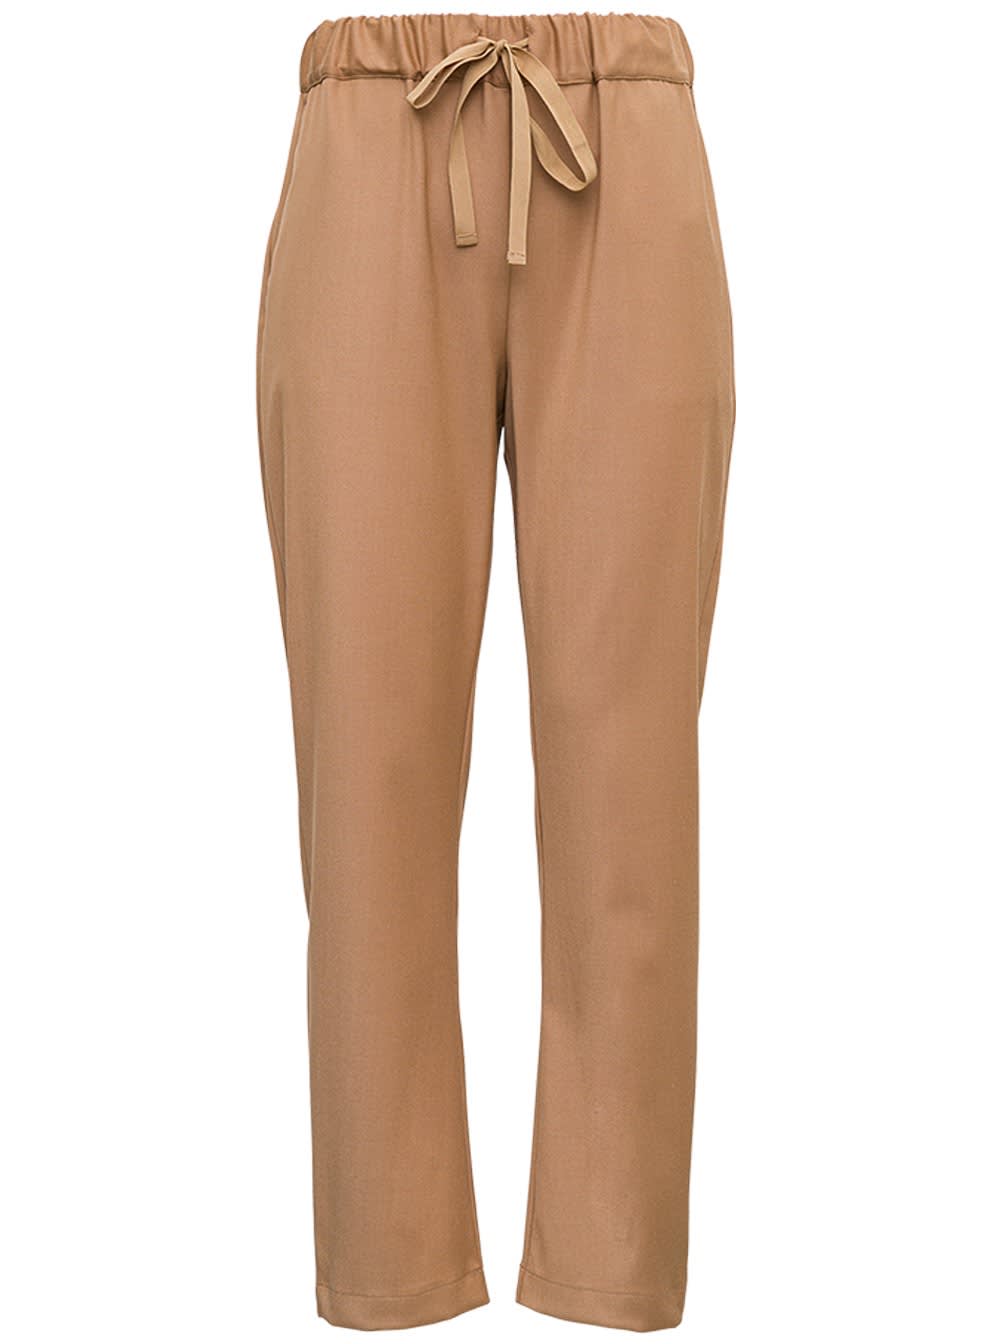 SEMICOUTURE Buddy Pants In Brown Wool Blend